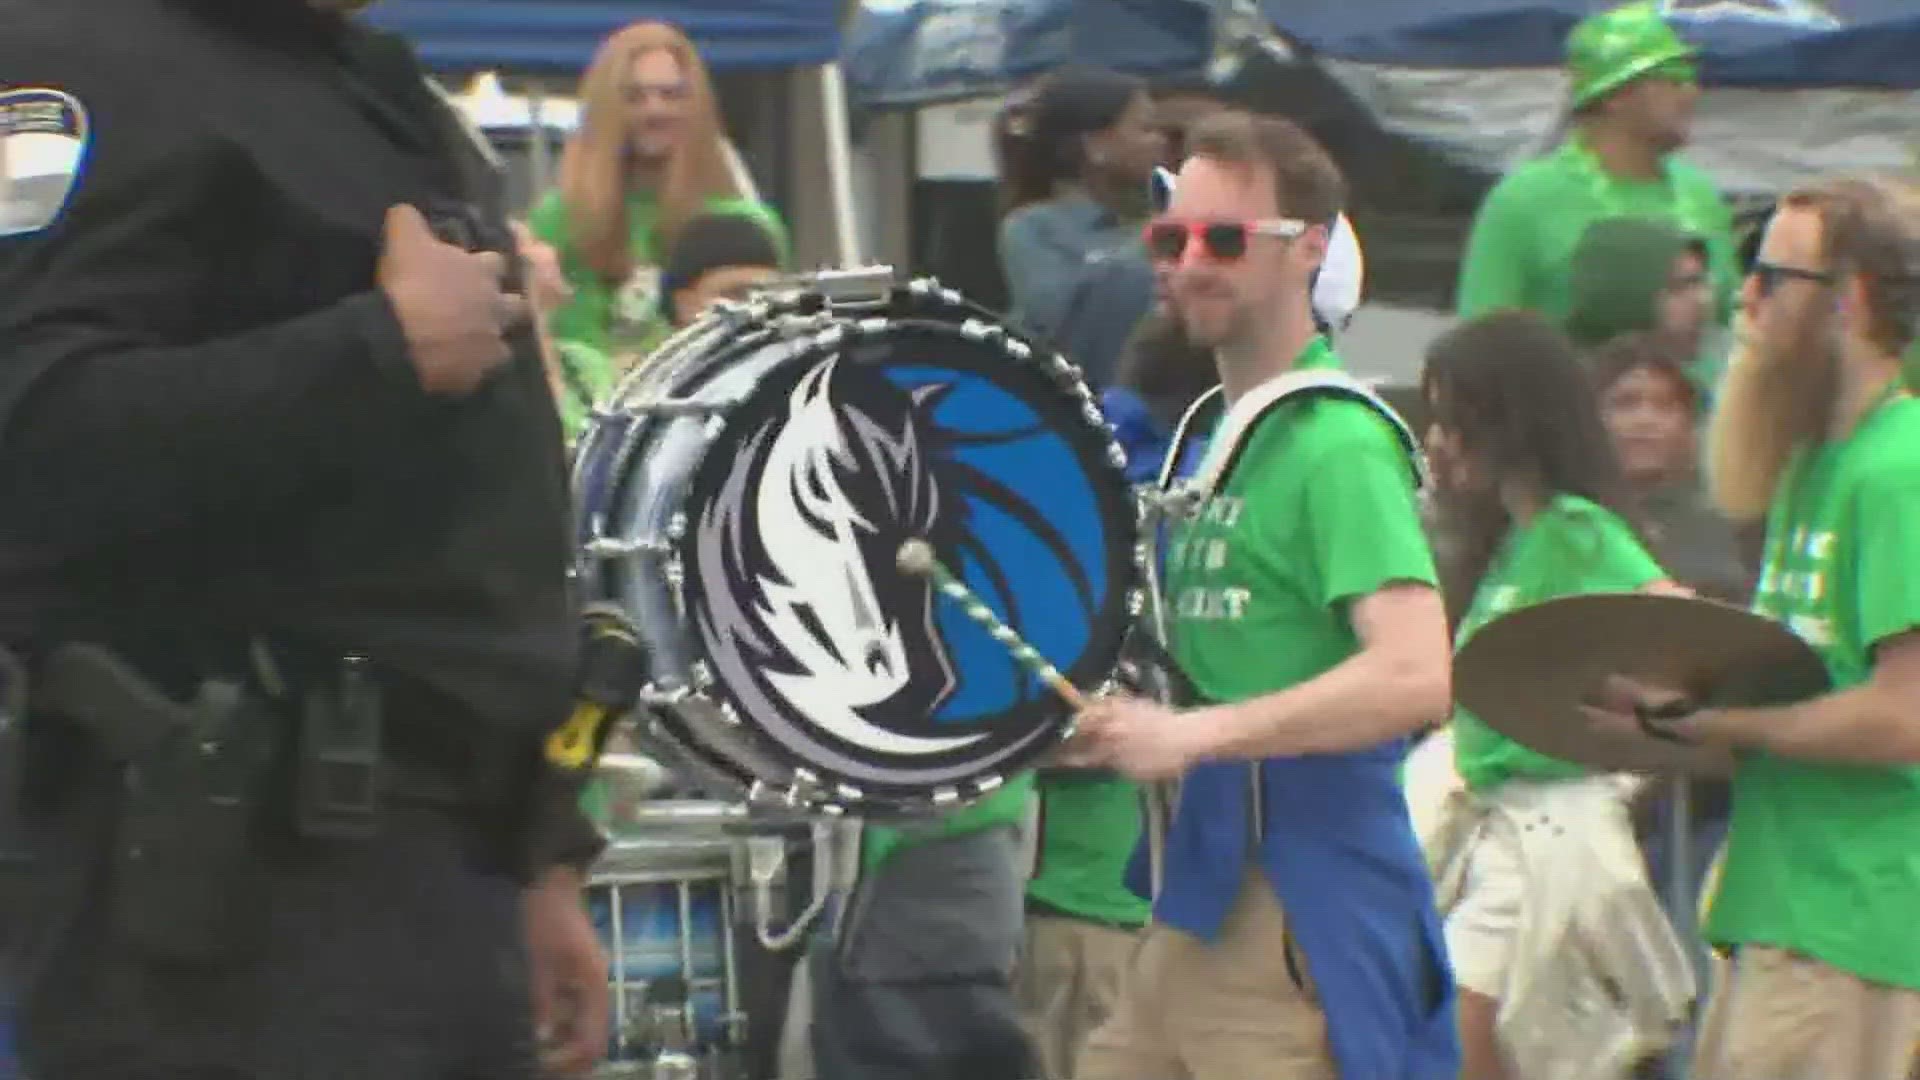 Plenty of St. Patty events continued in the rain Saturday.